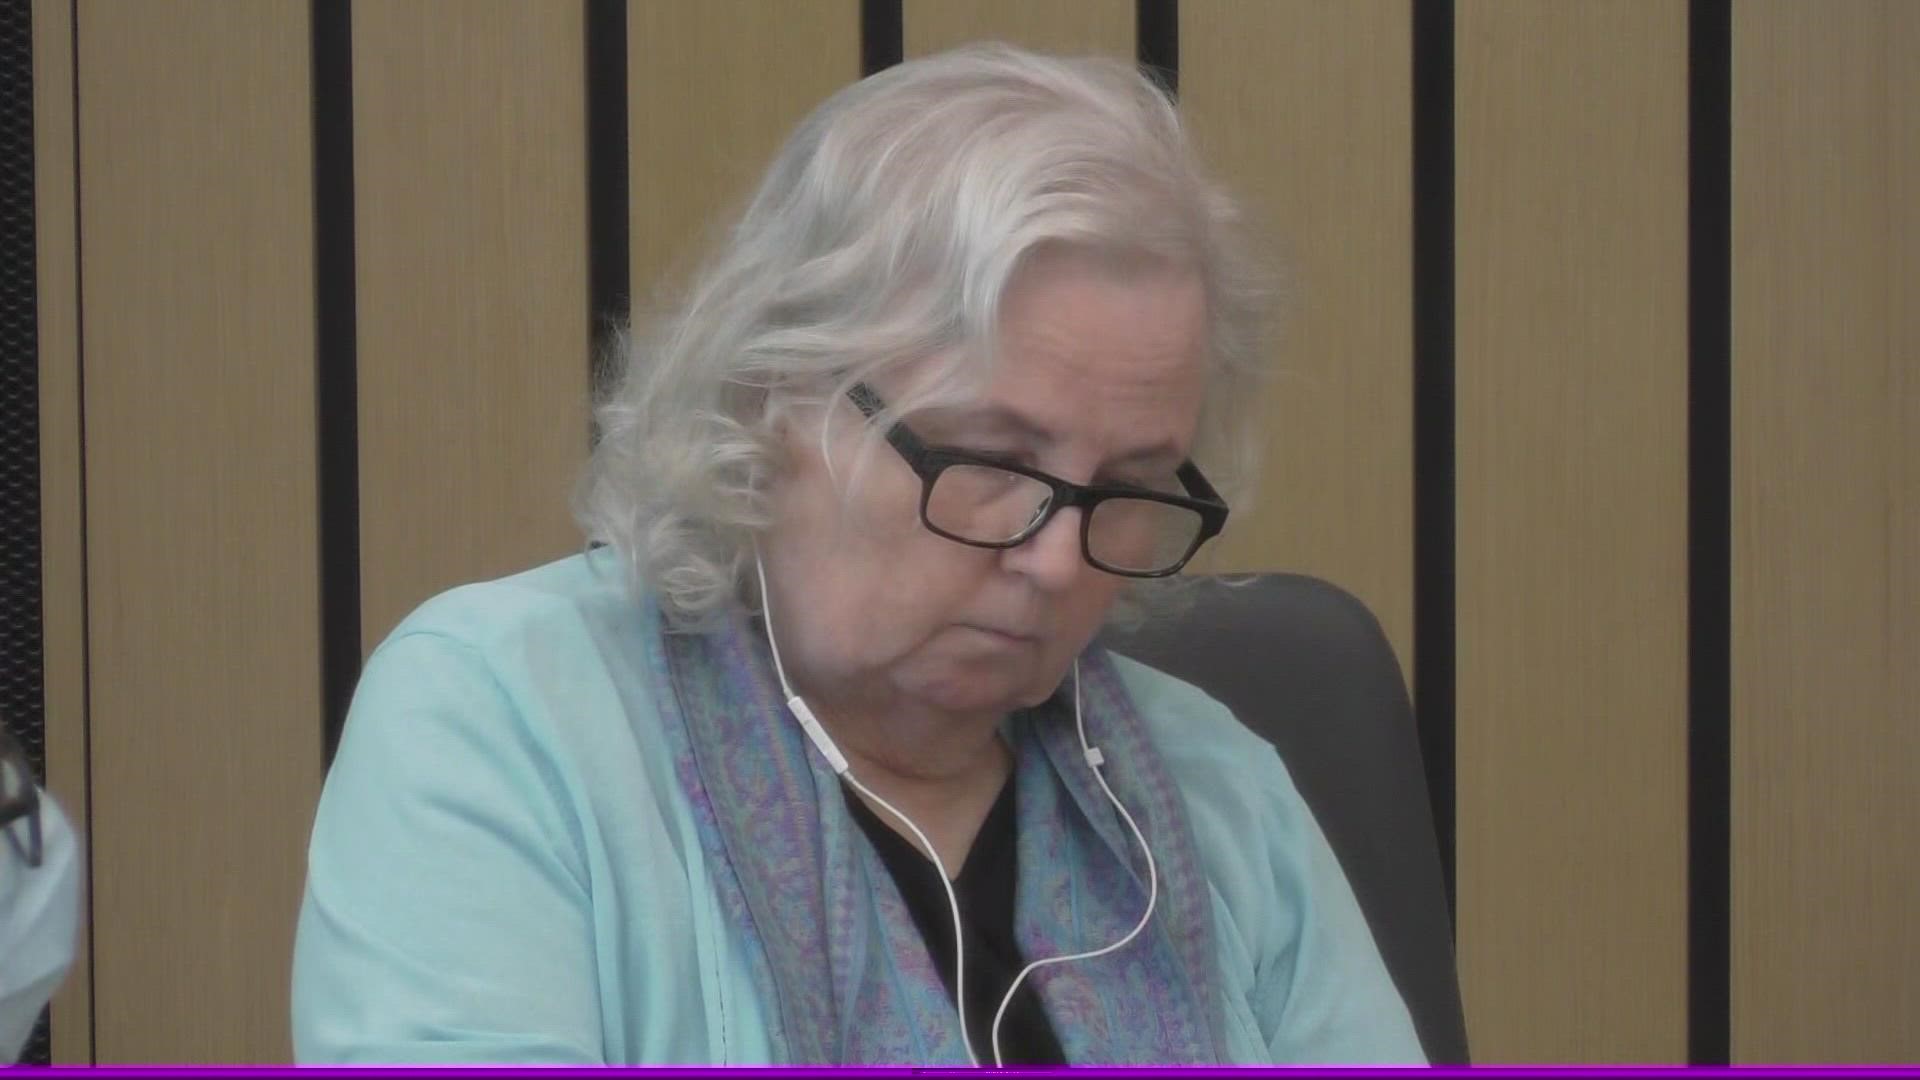 Nancy Crampton-Brophy, former romance novelist, is accused of shooting and killing her husband Daniel Brophy in 2018. Opening statements in her trial began Monday.